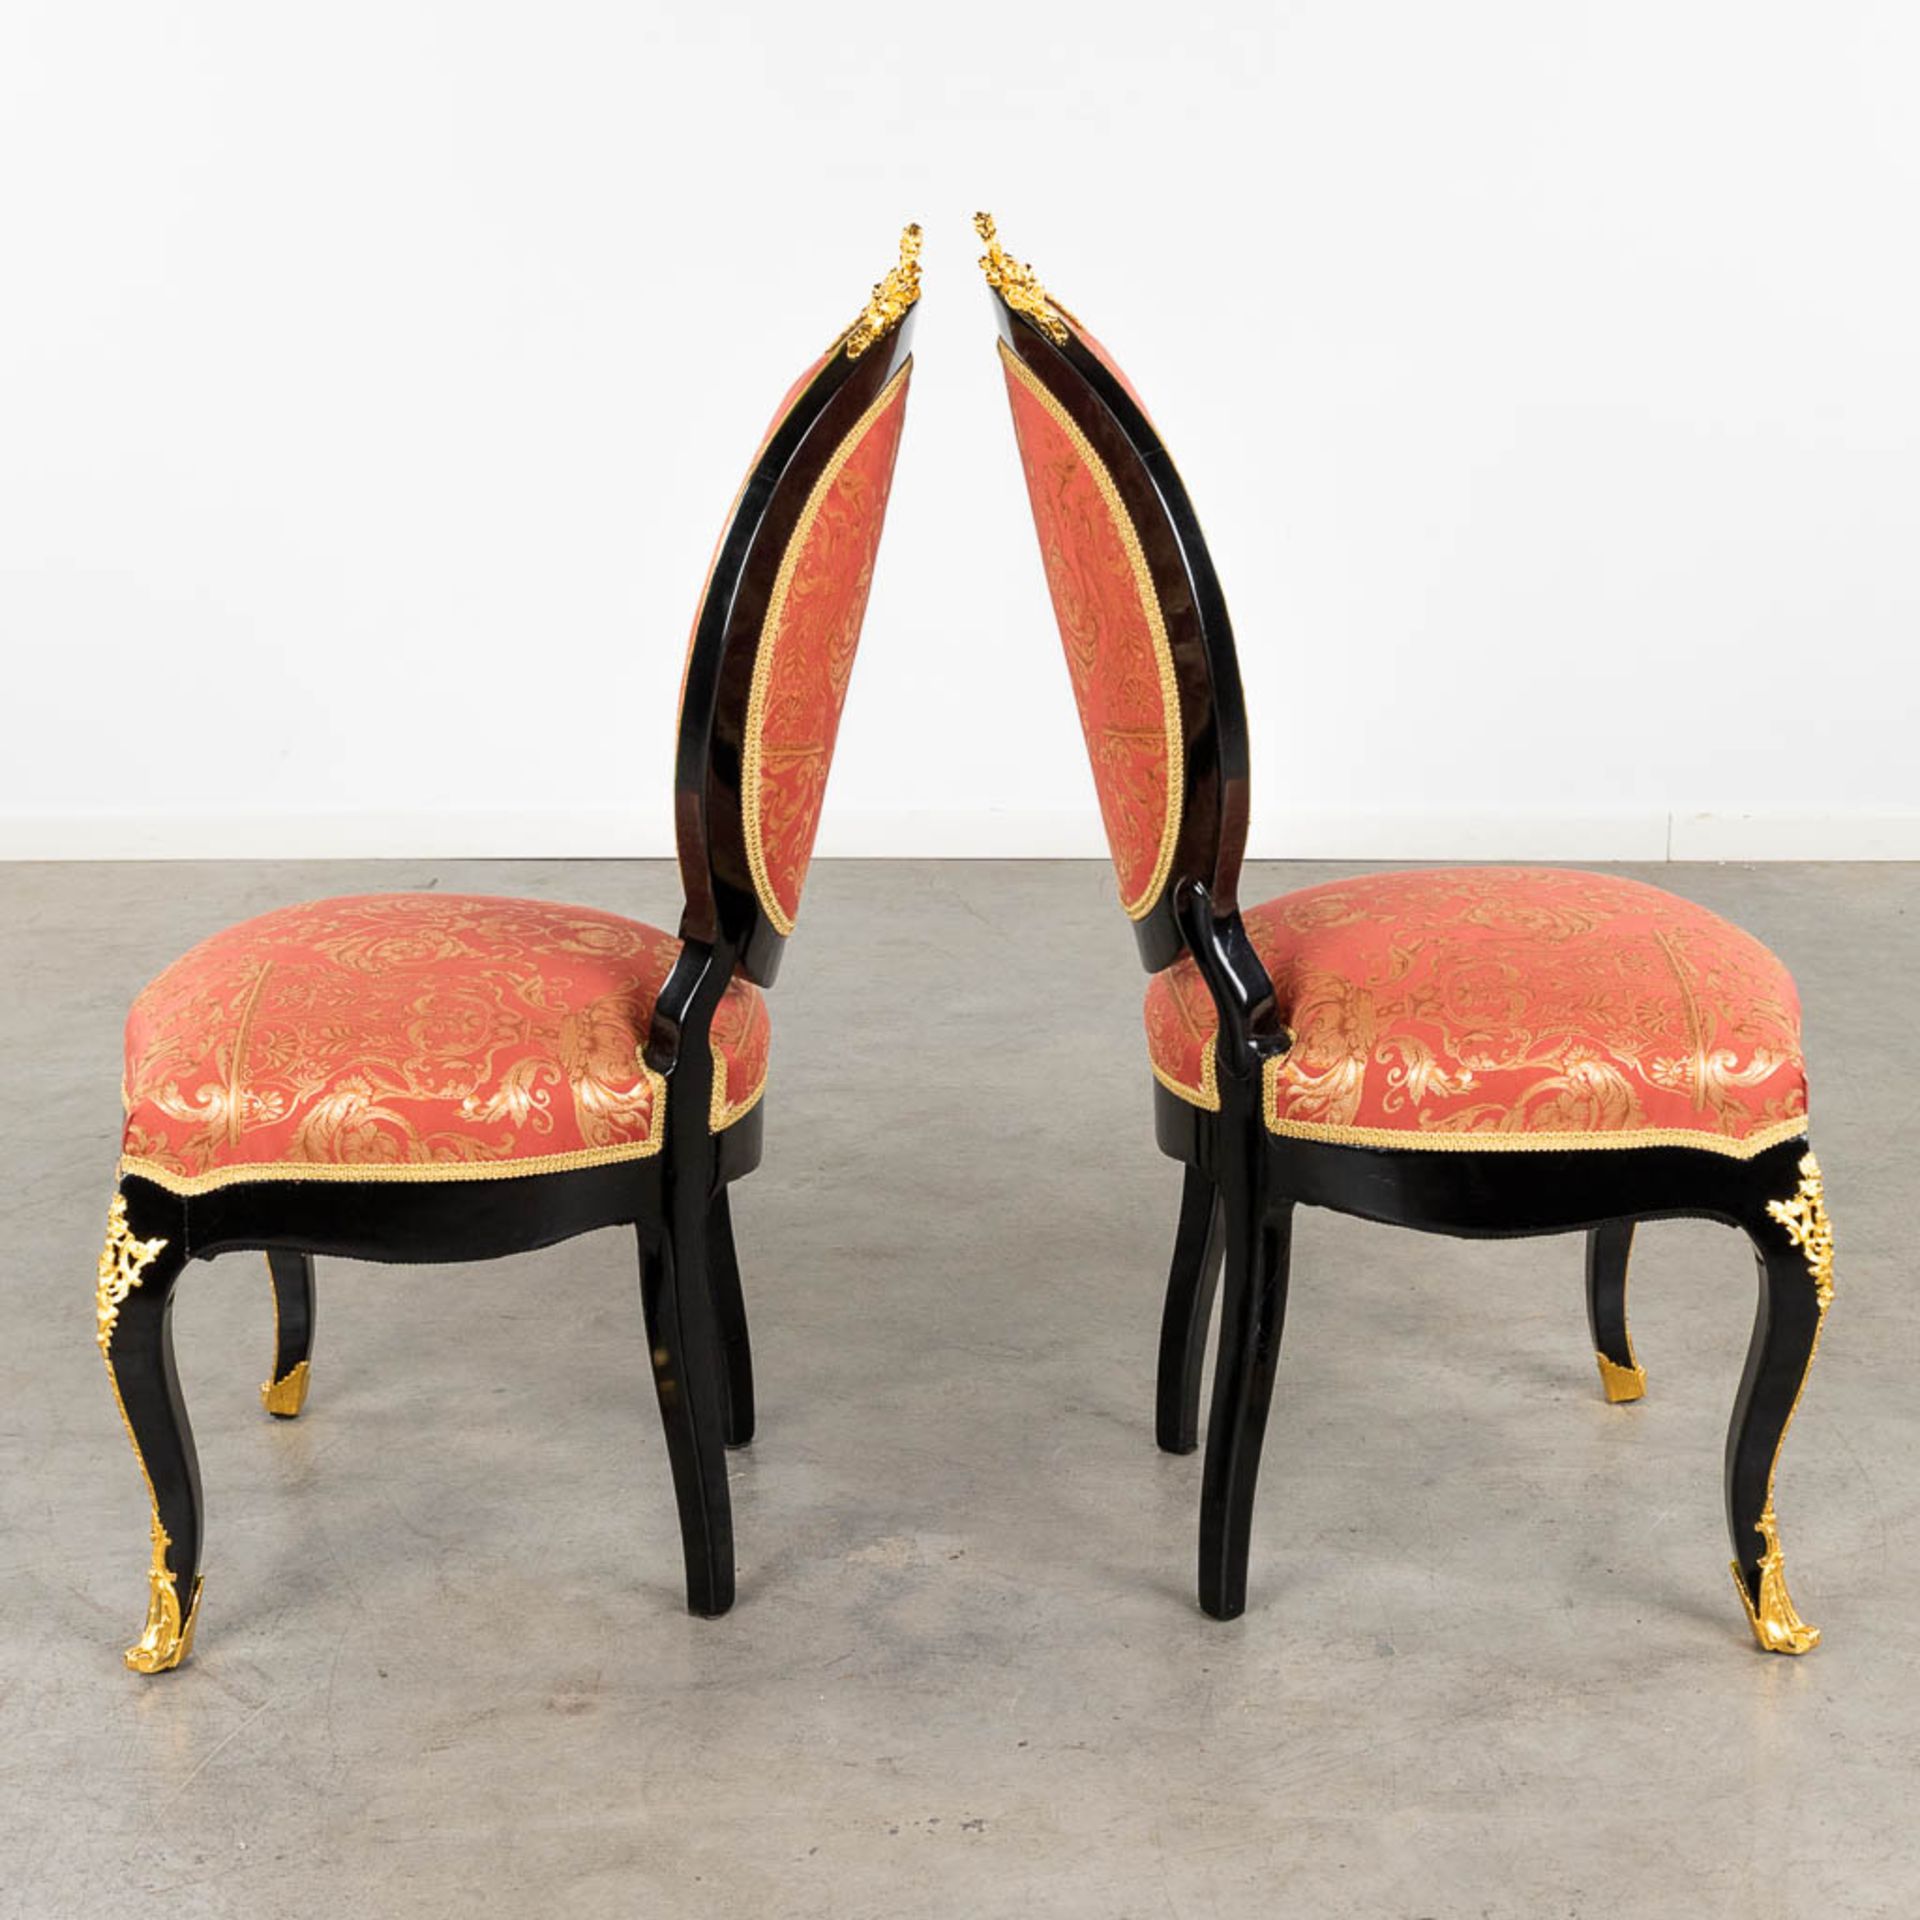 A pair of Chairs, Boulle technique, tortoise shell and copper inlay, Napoleon 3, 19th C. (D:56 x W:5 - Image 4 of 14